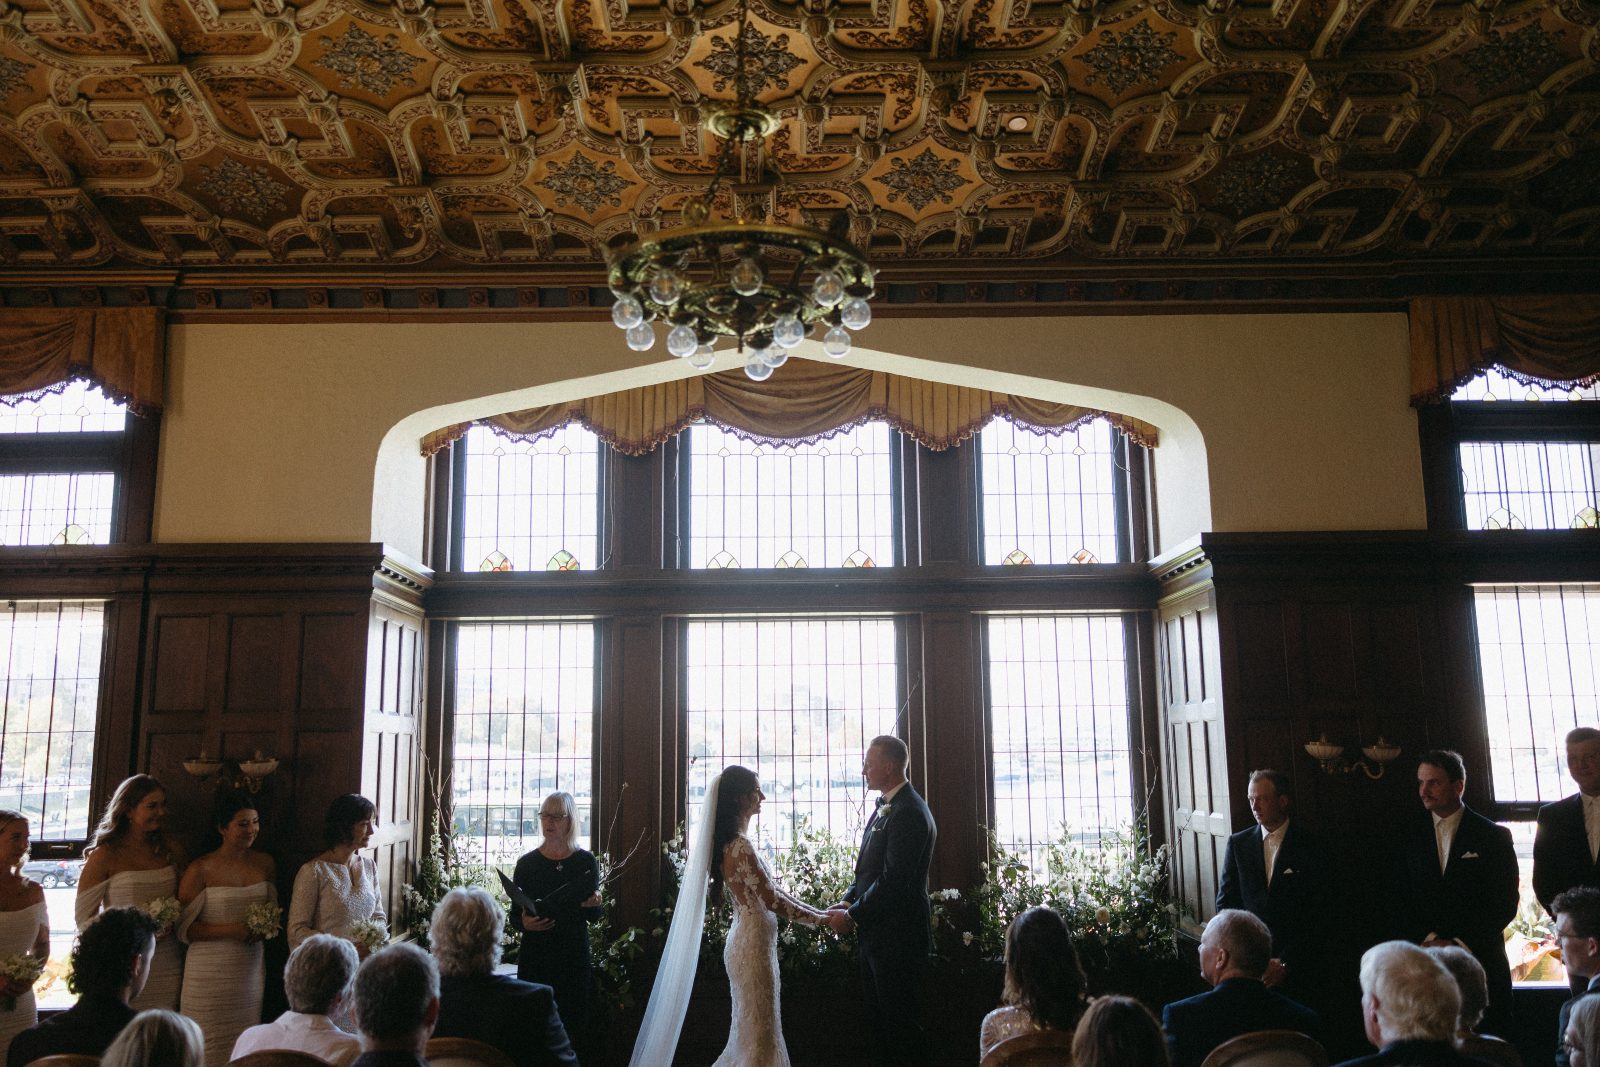 Another capture from the ceremony, zoomed out to capture all of the bridal party, some of the guests as well as some of the beautiful details of the library at the Fairmont Empress.